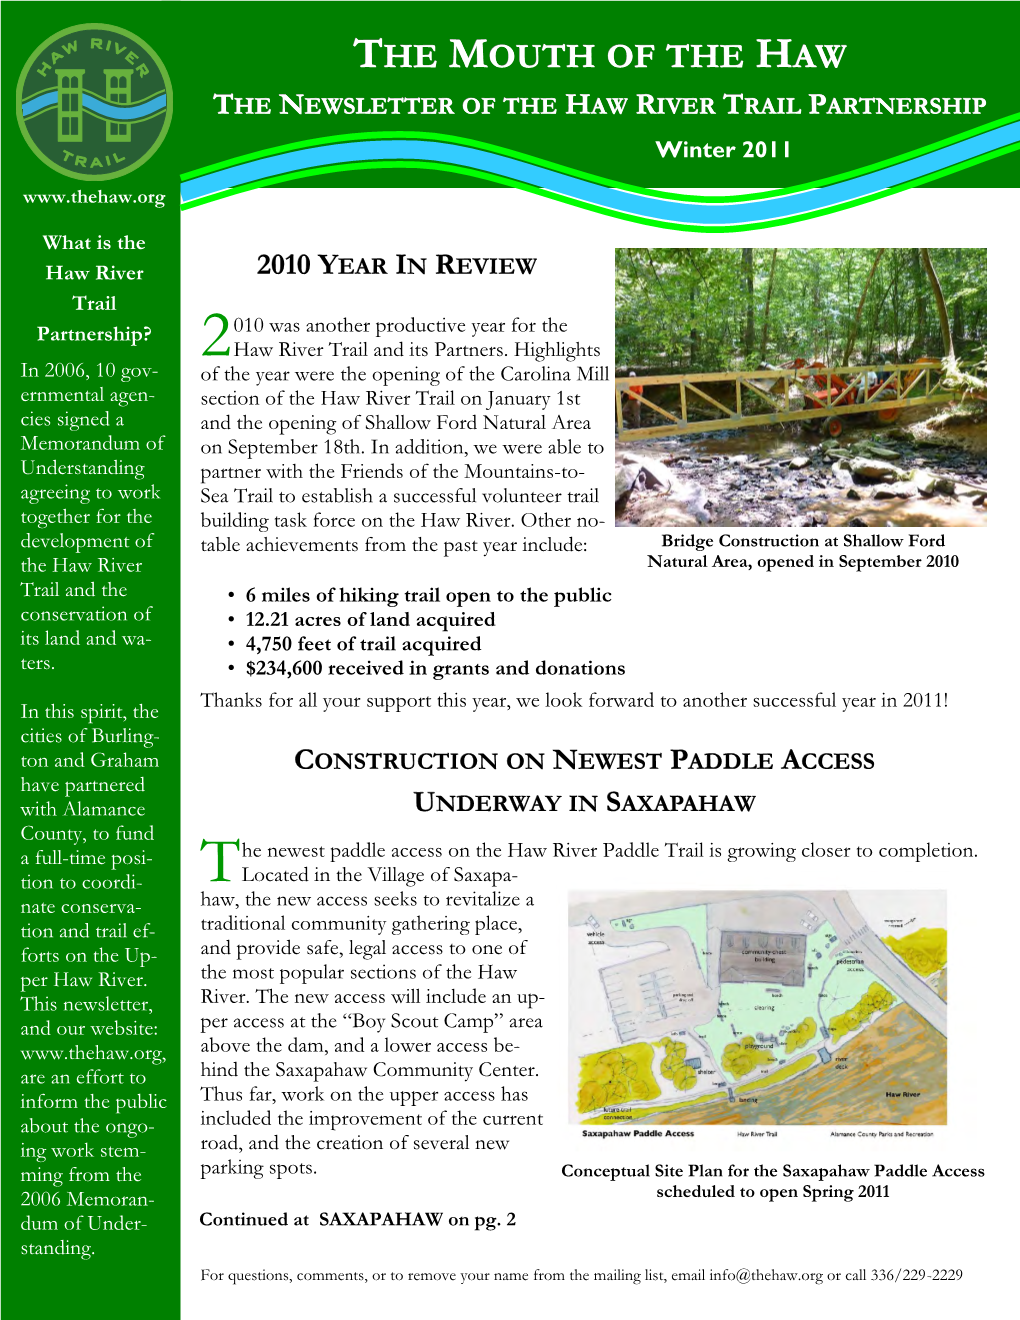 THE MOUTH of the HAW the NEWSLETTER of the HAW RIVER TRAIL PARTNERSHIP Winter 2011